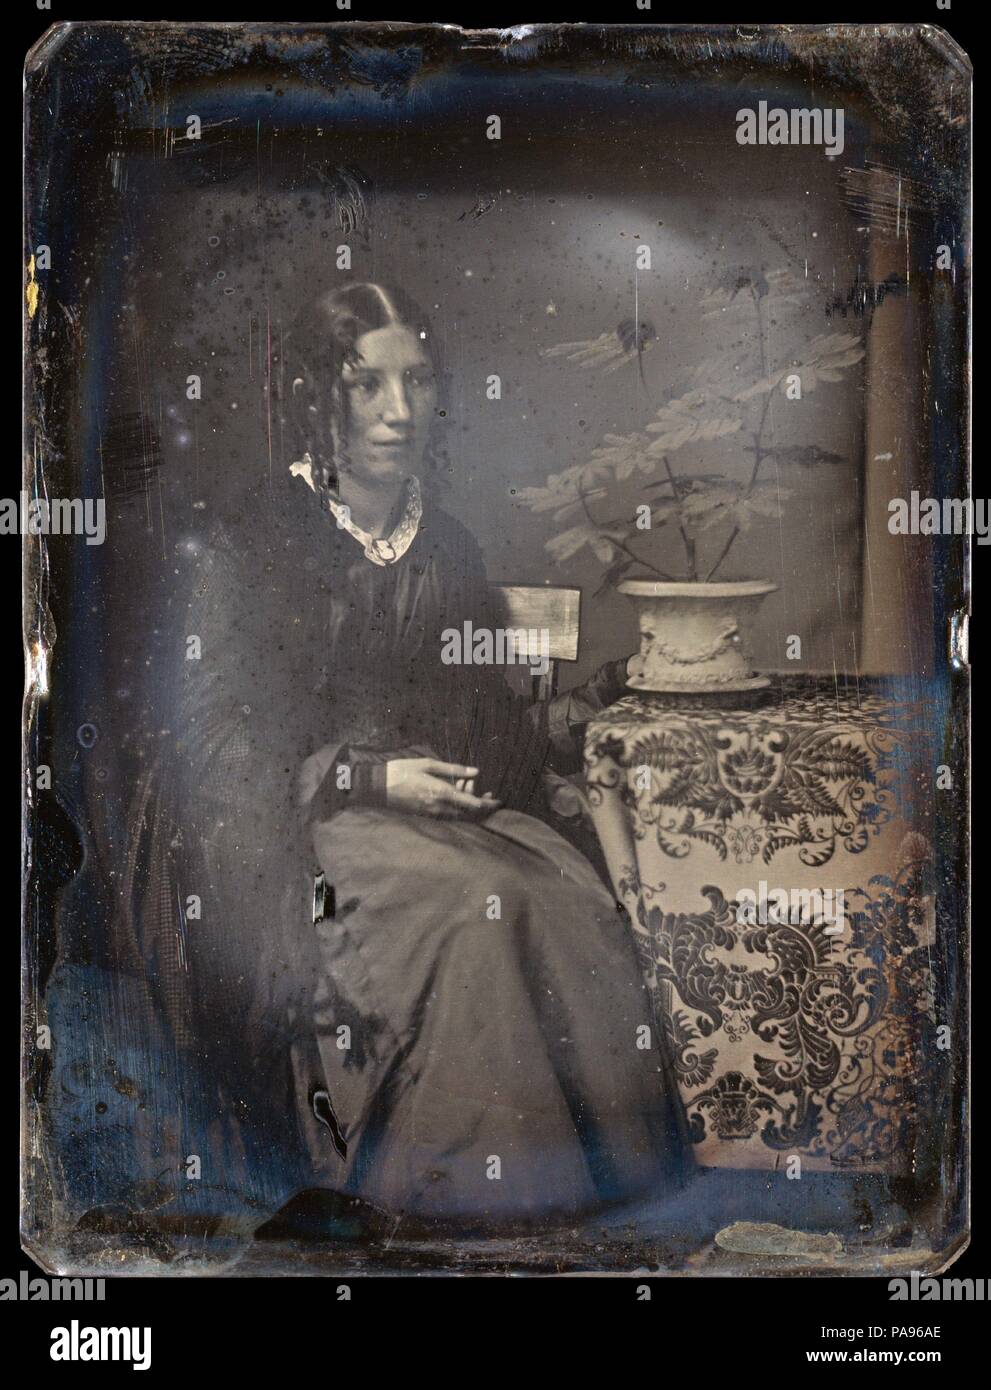 Harriet Beecher Stowe. Artist: Albert Sands Southworth (American, West Fairlee, Vermont 1811-1894 Charlestown, Massachusetts); Josiah Johnson Hawes (American, Wayland, Massachusetts 1808-1901 Crawford Notch, New Hampshire). Dimensions: 10.8 x 8.3 cm. (4  1/4  x 3  1/4  in.). Photography Studio: Southworth and Hawes (American, active 1843-1863). Date: 1850s.  This quarter-plate daguerreotype of the American author Harriet Beecher Stowe (1811-1896) was probably made around the time of the publication of her influential novel Uncle Tom's Cabin (1852). The enormously successful book, which the dee Stock Photo